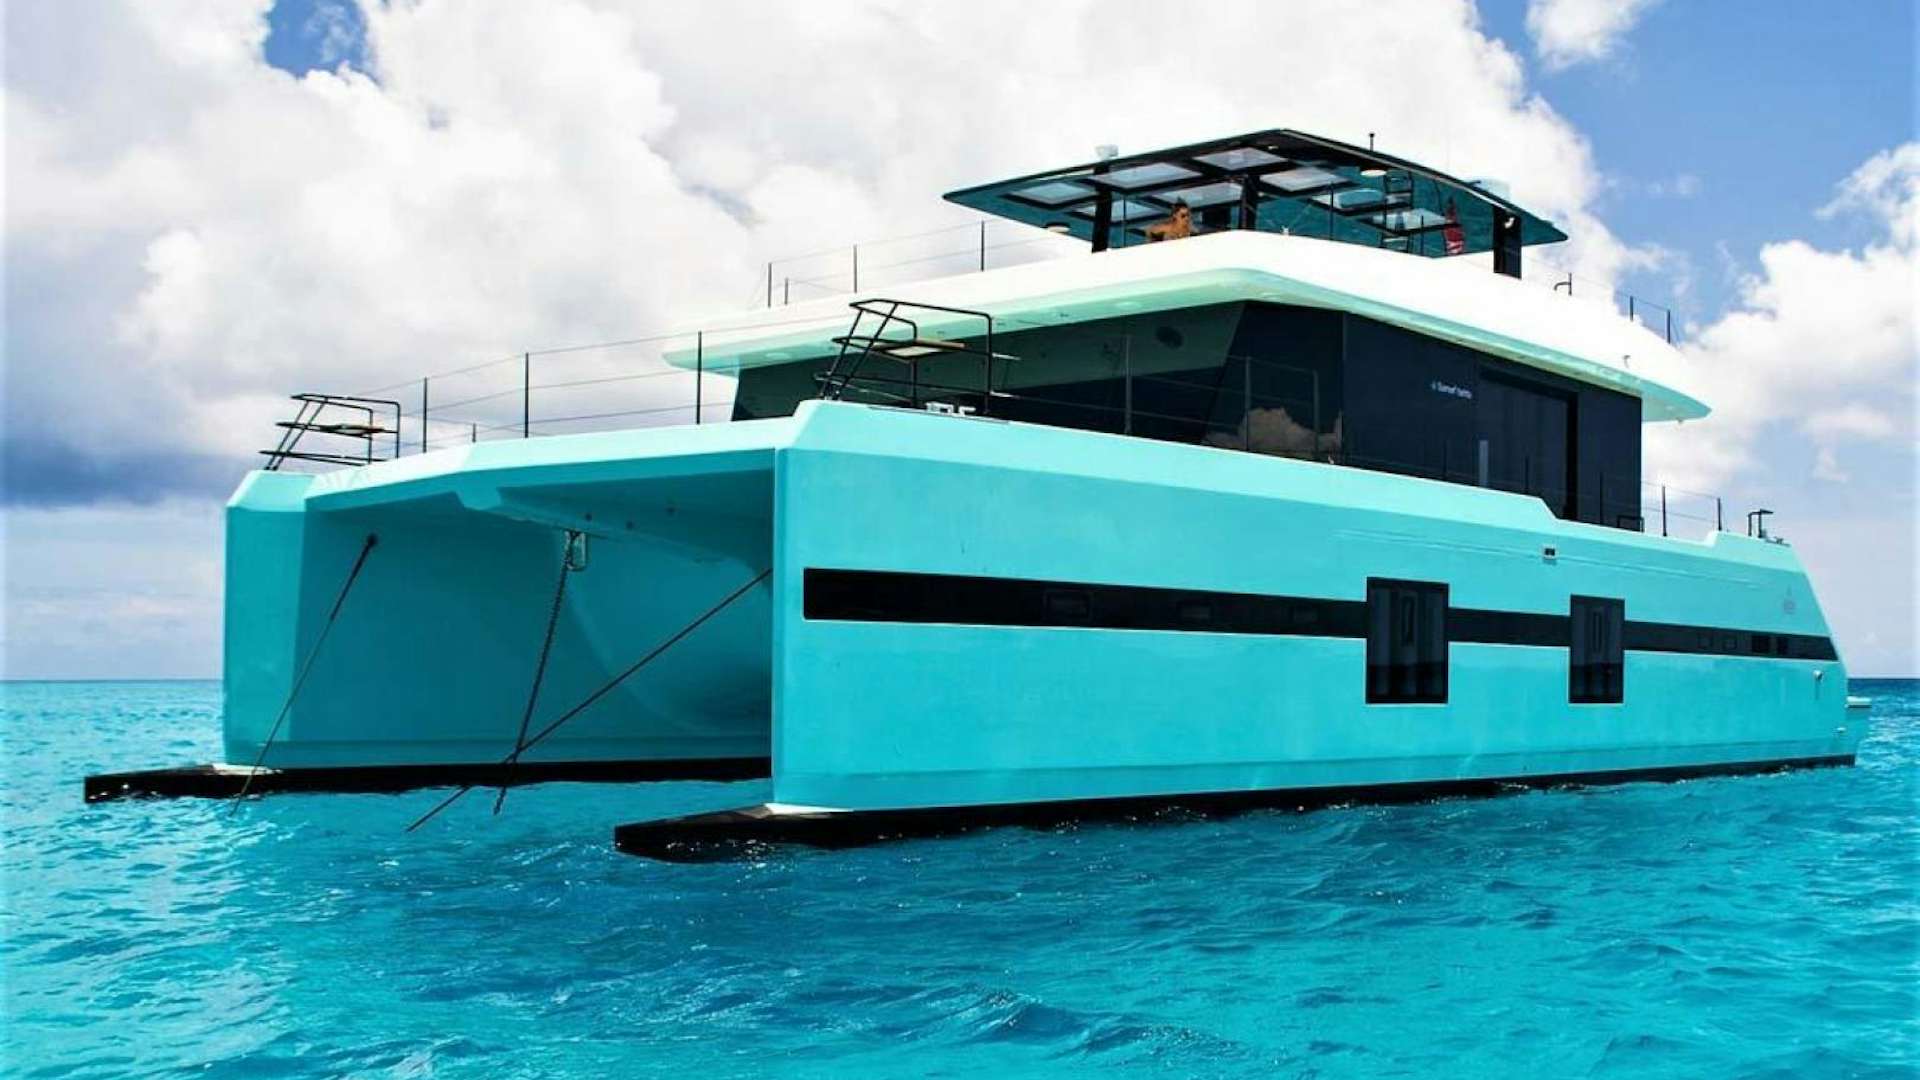 Rock star 2.0
Yacht for Sale